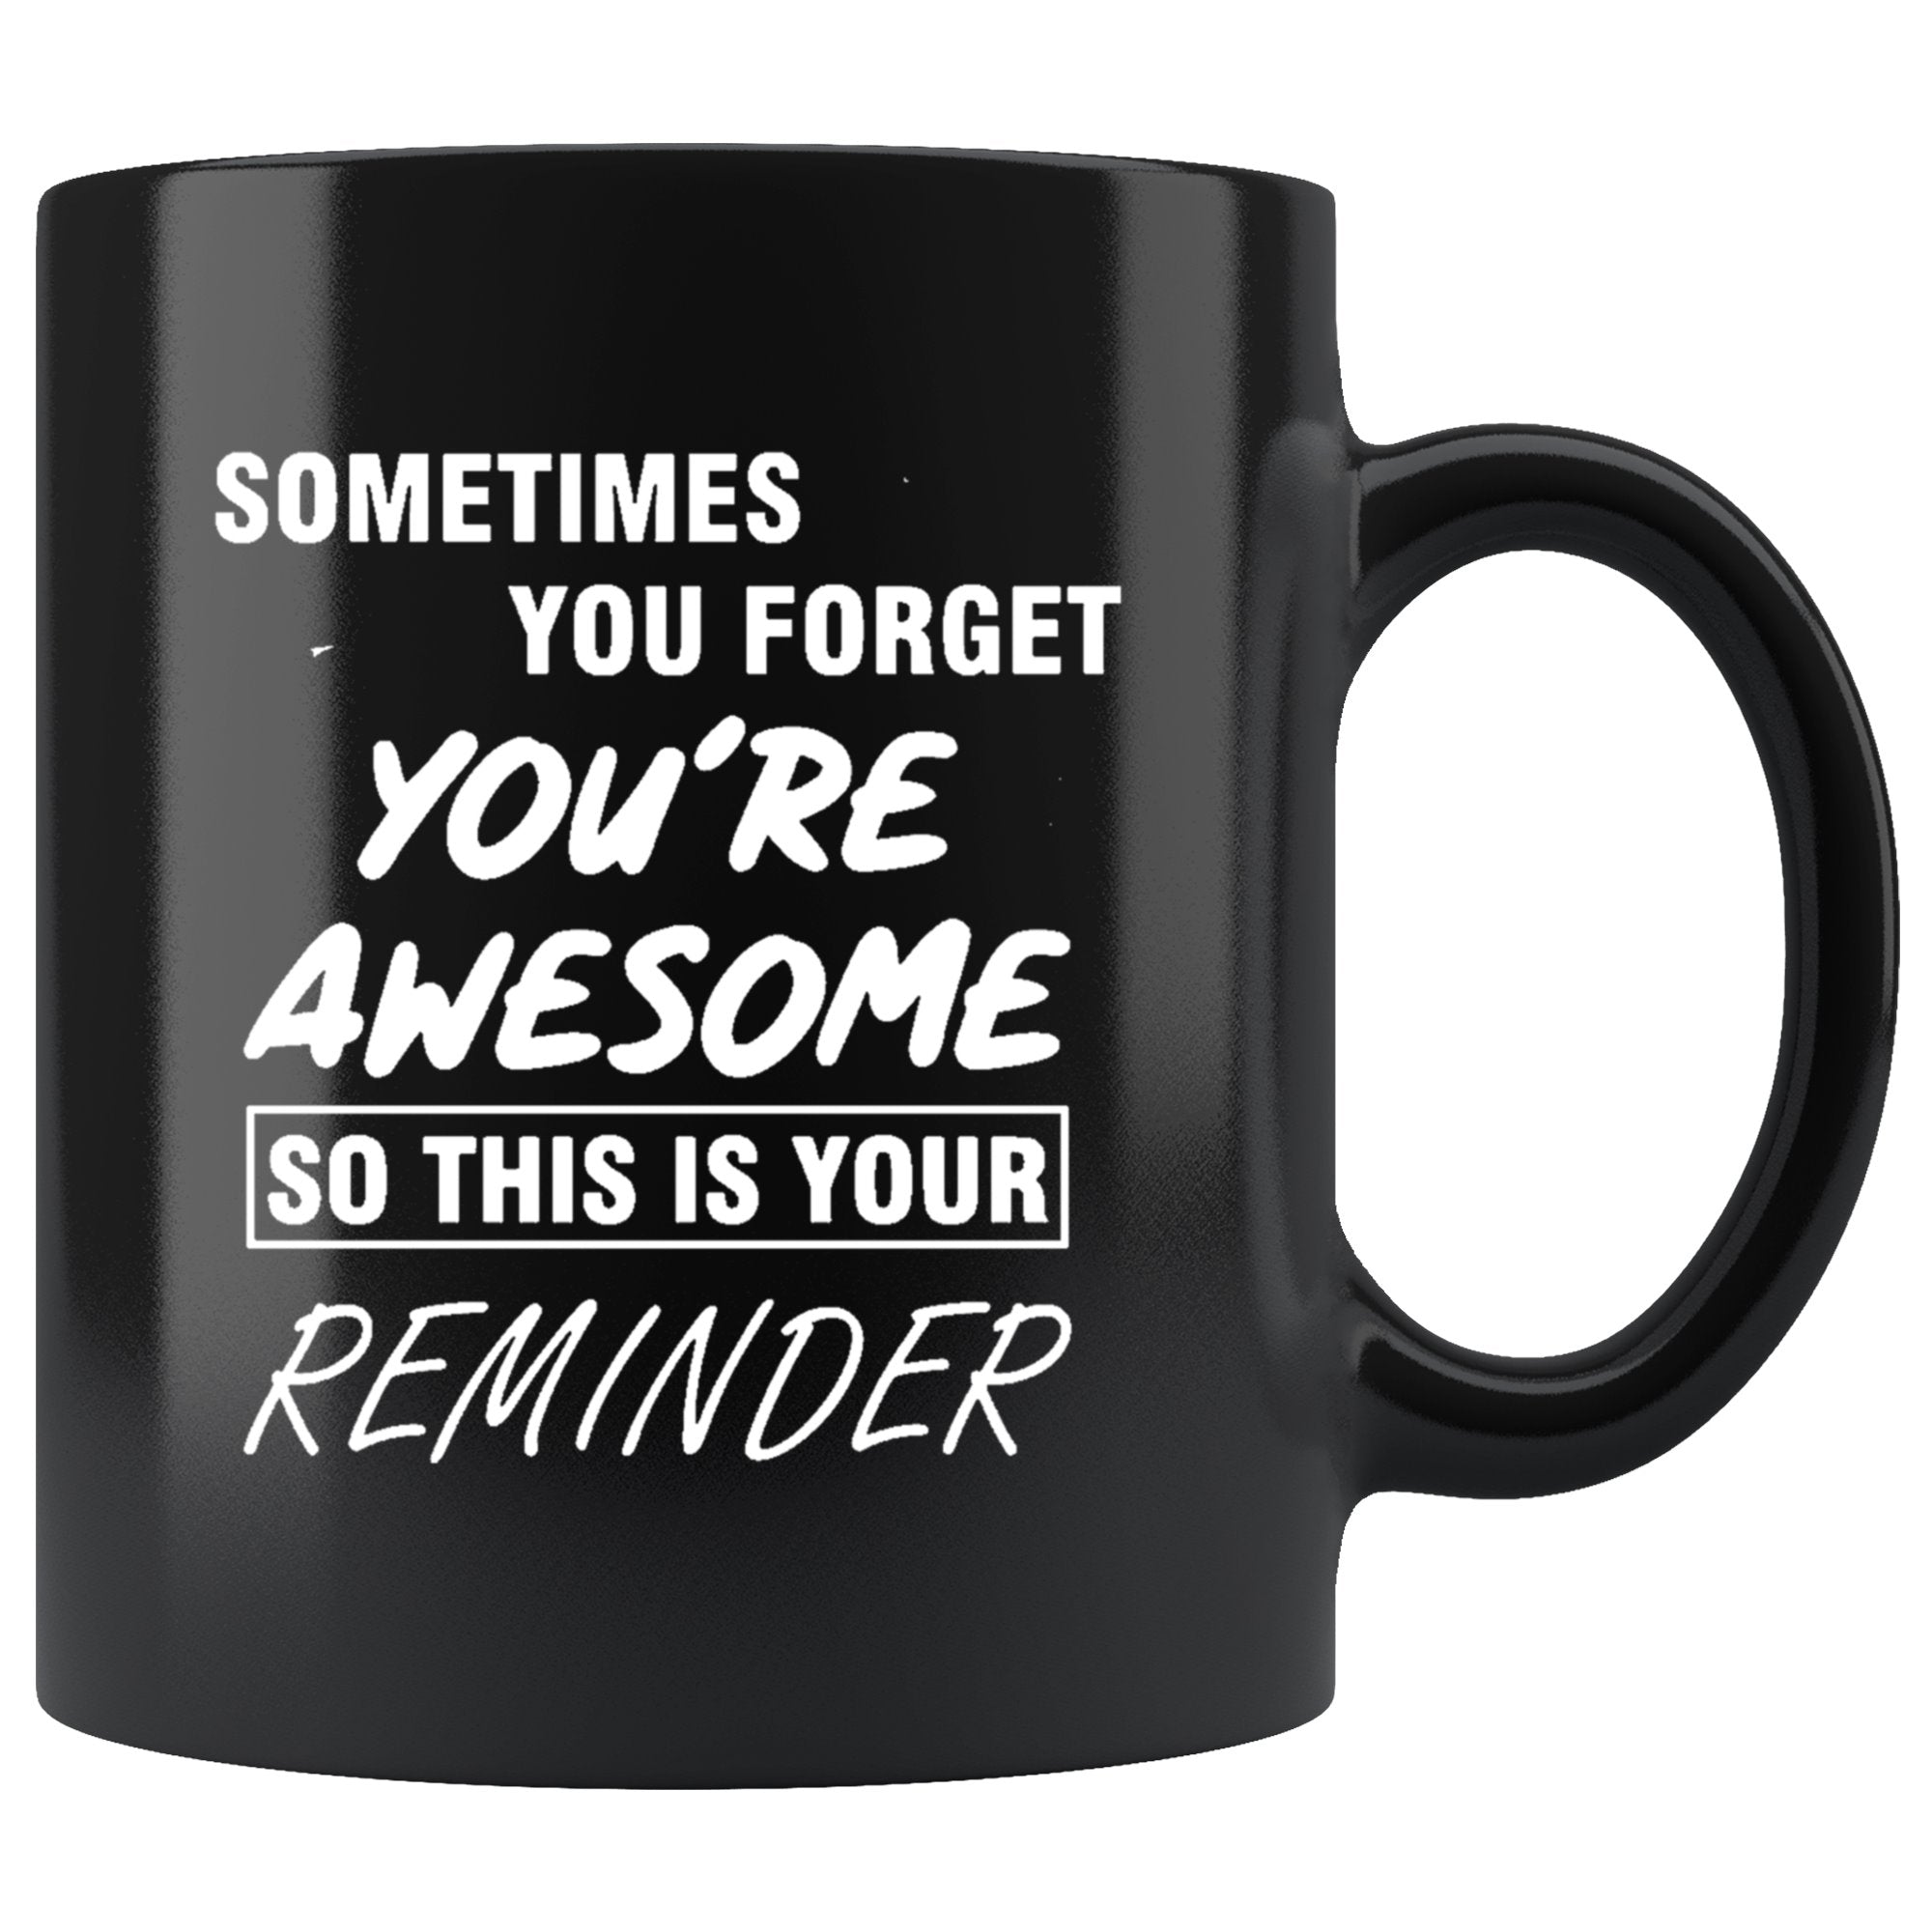 Sometime You Forget You're Awesome So This Is Your Reminder Black Mug Drinkware teelaunch 11oz Black Mug 